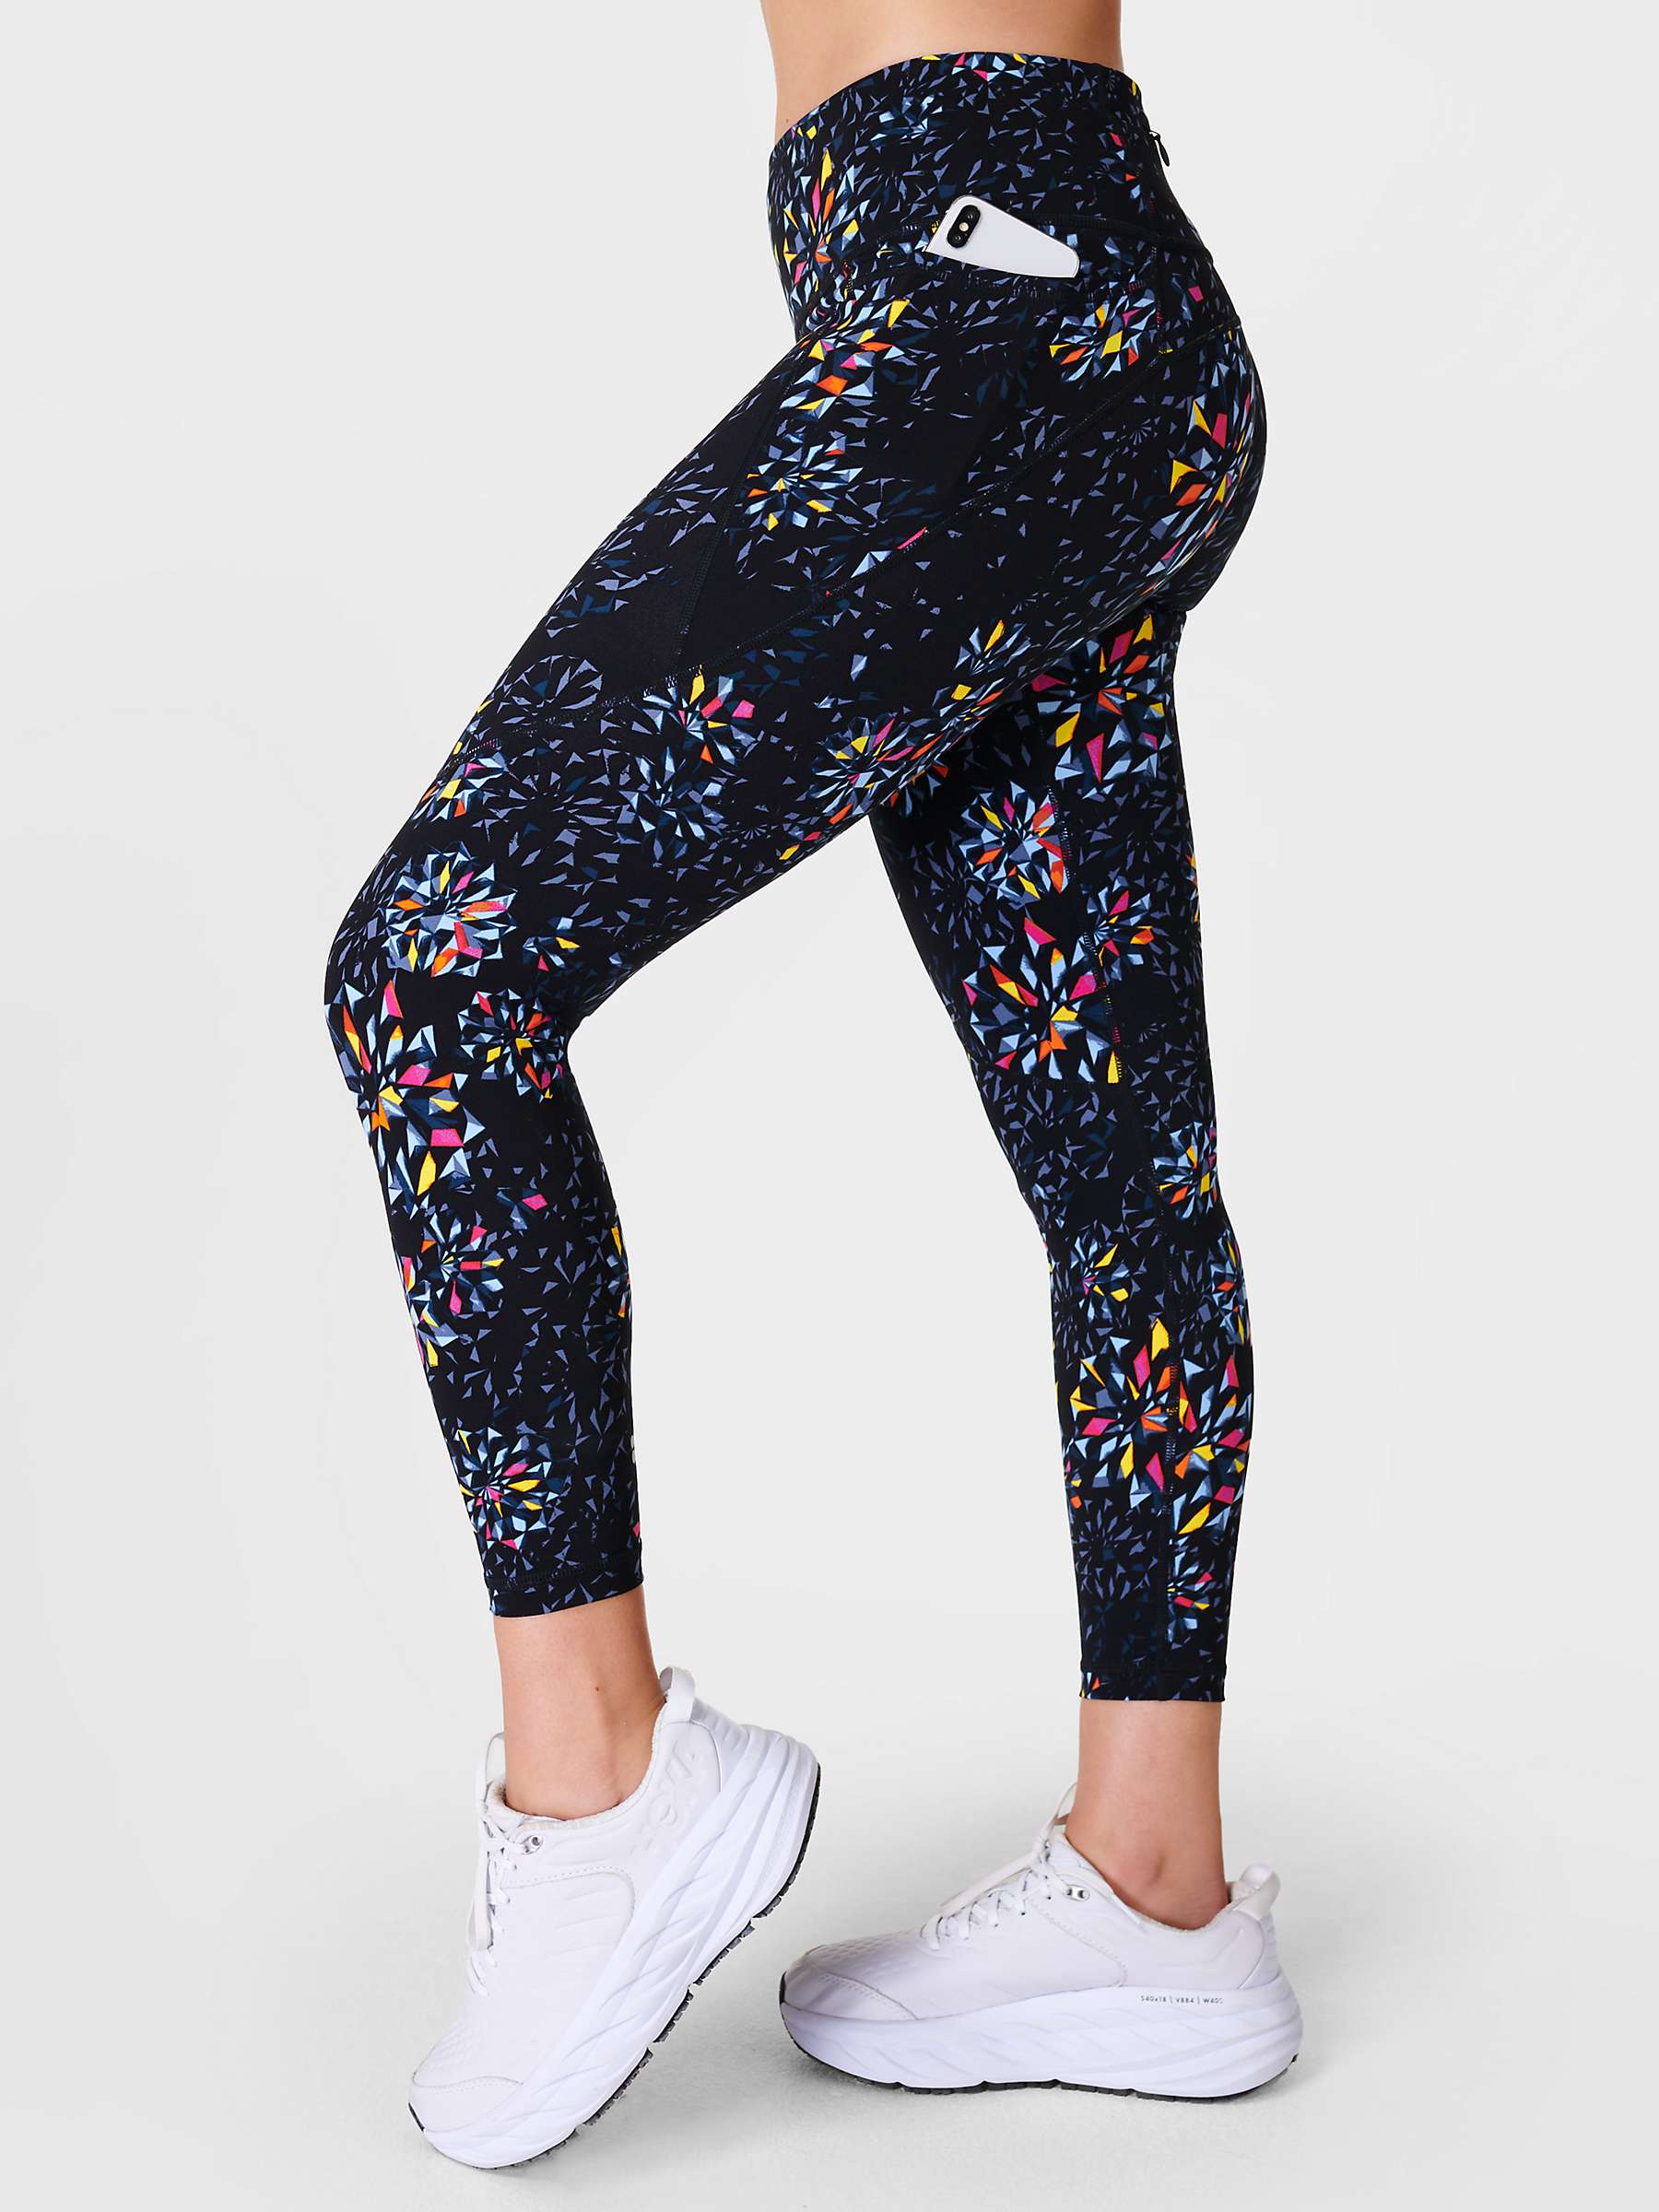 Sweaty Betty Power 7/8 Gym Leggings, Black Faceted Floral at John